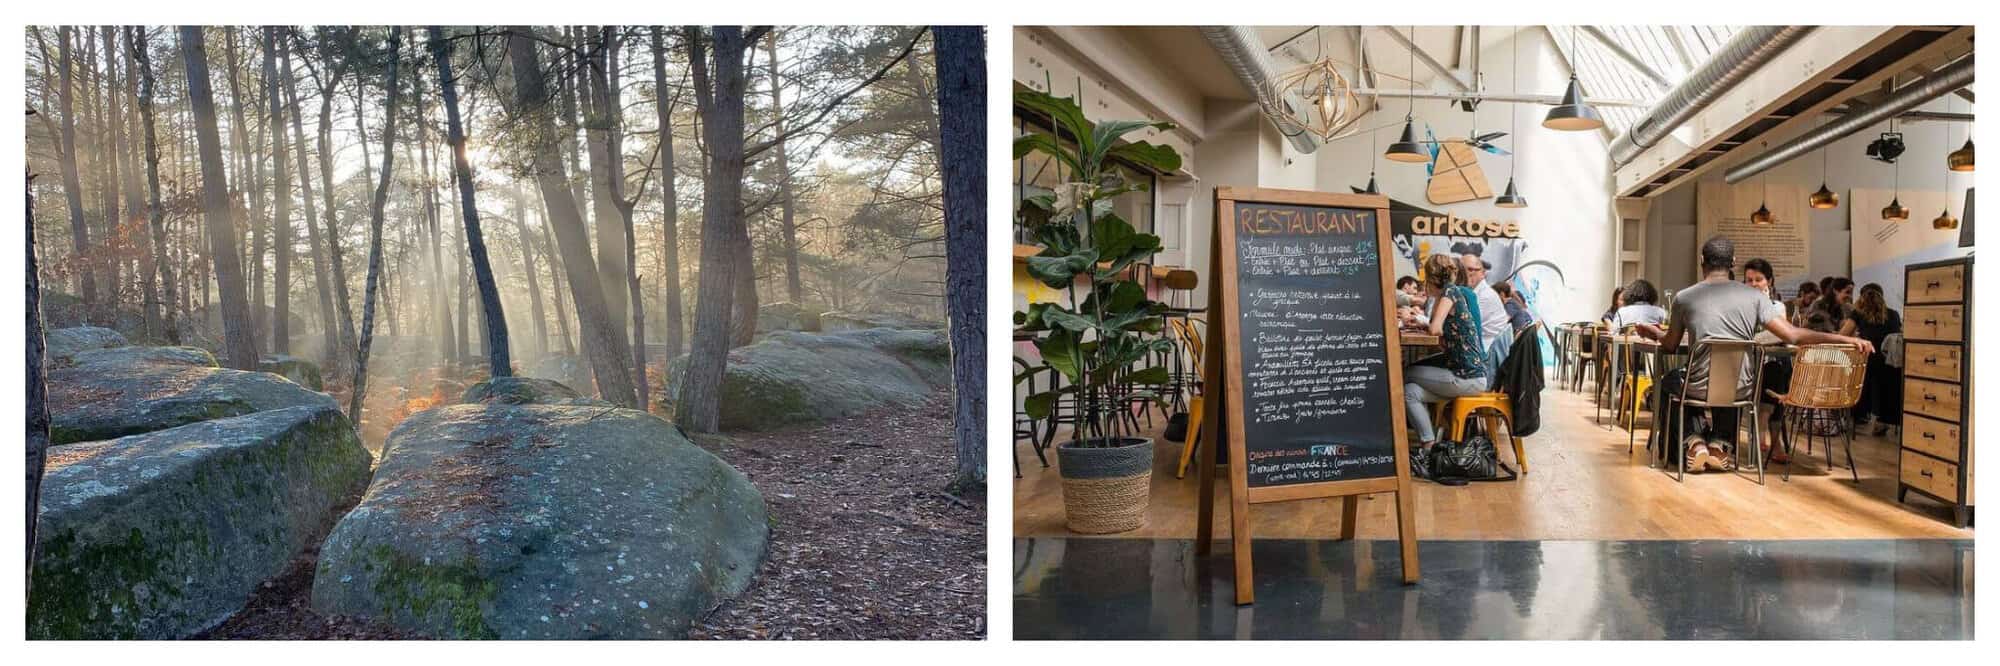 Morning light breaks through the trees in the Fontainebleau forest with some small boulders in the foreground. A busy cafeteria in Arkose Nation with a large billboard in the foreground. 